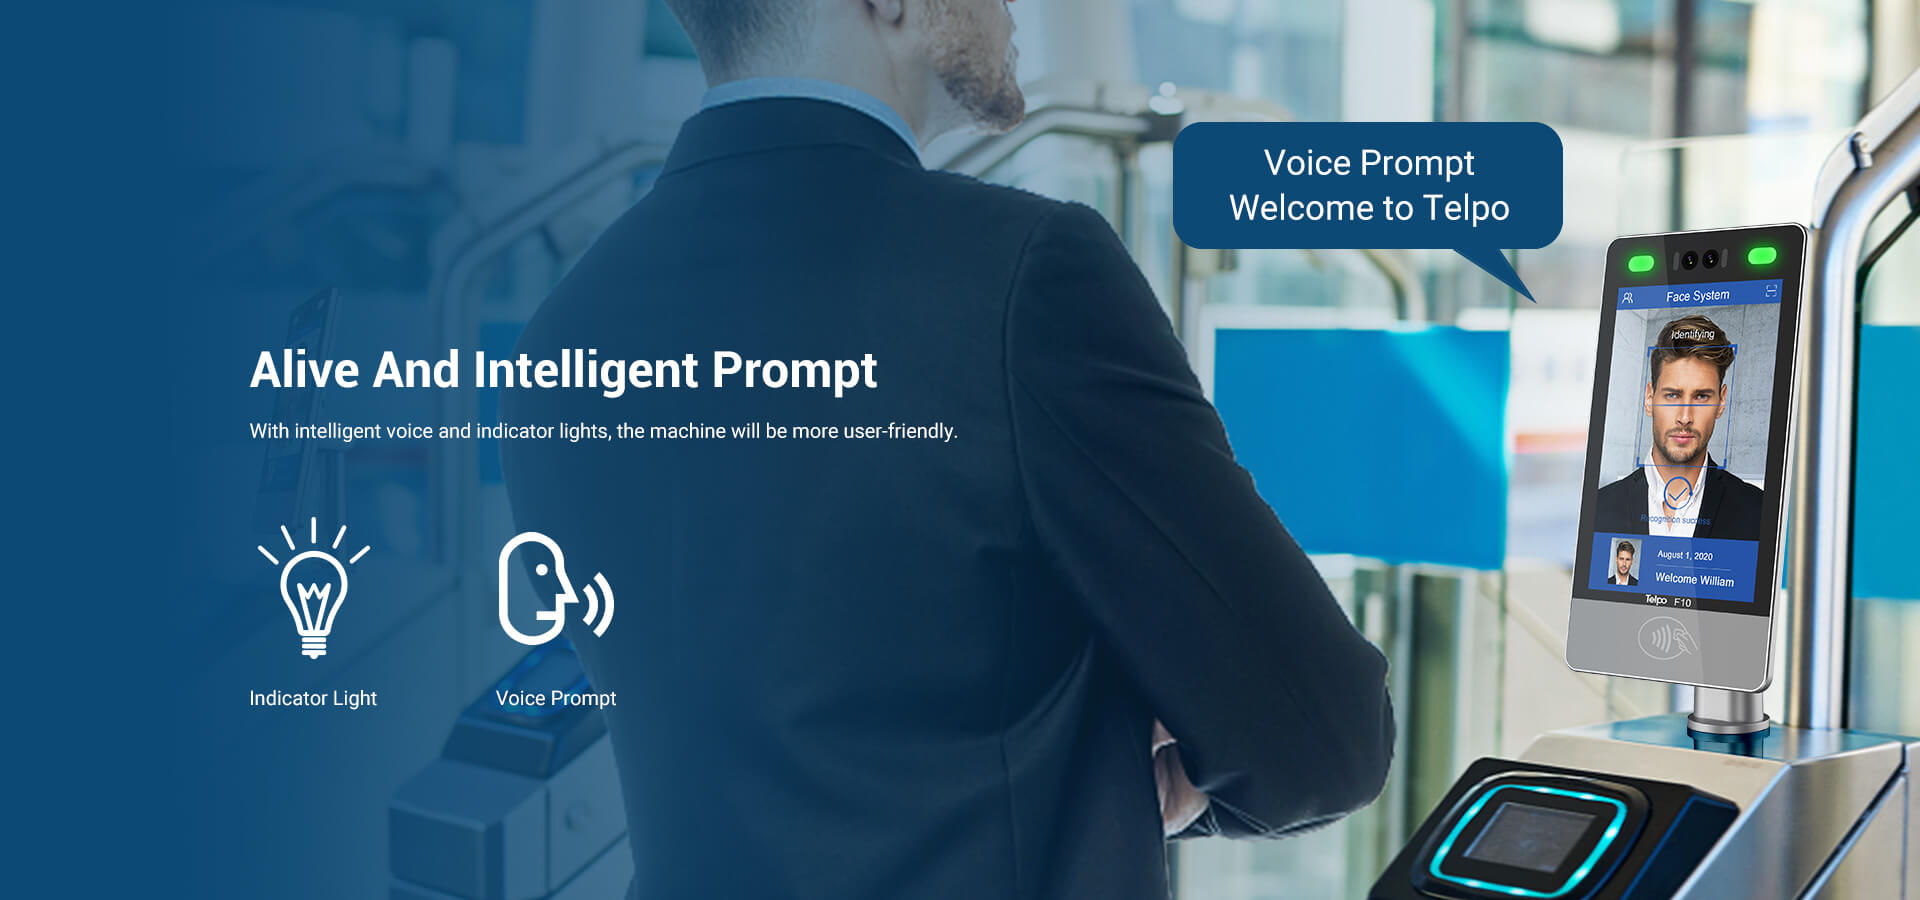 alige and intelligent Vioce Prompt Face Detection Recognition device